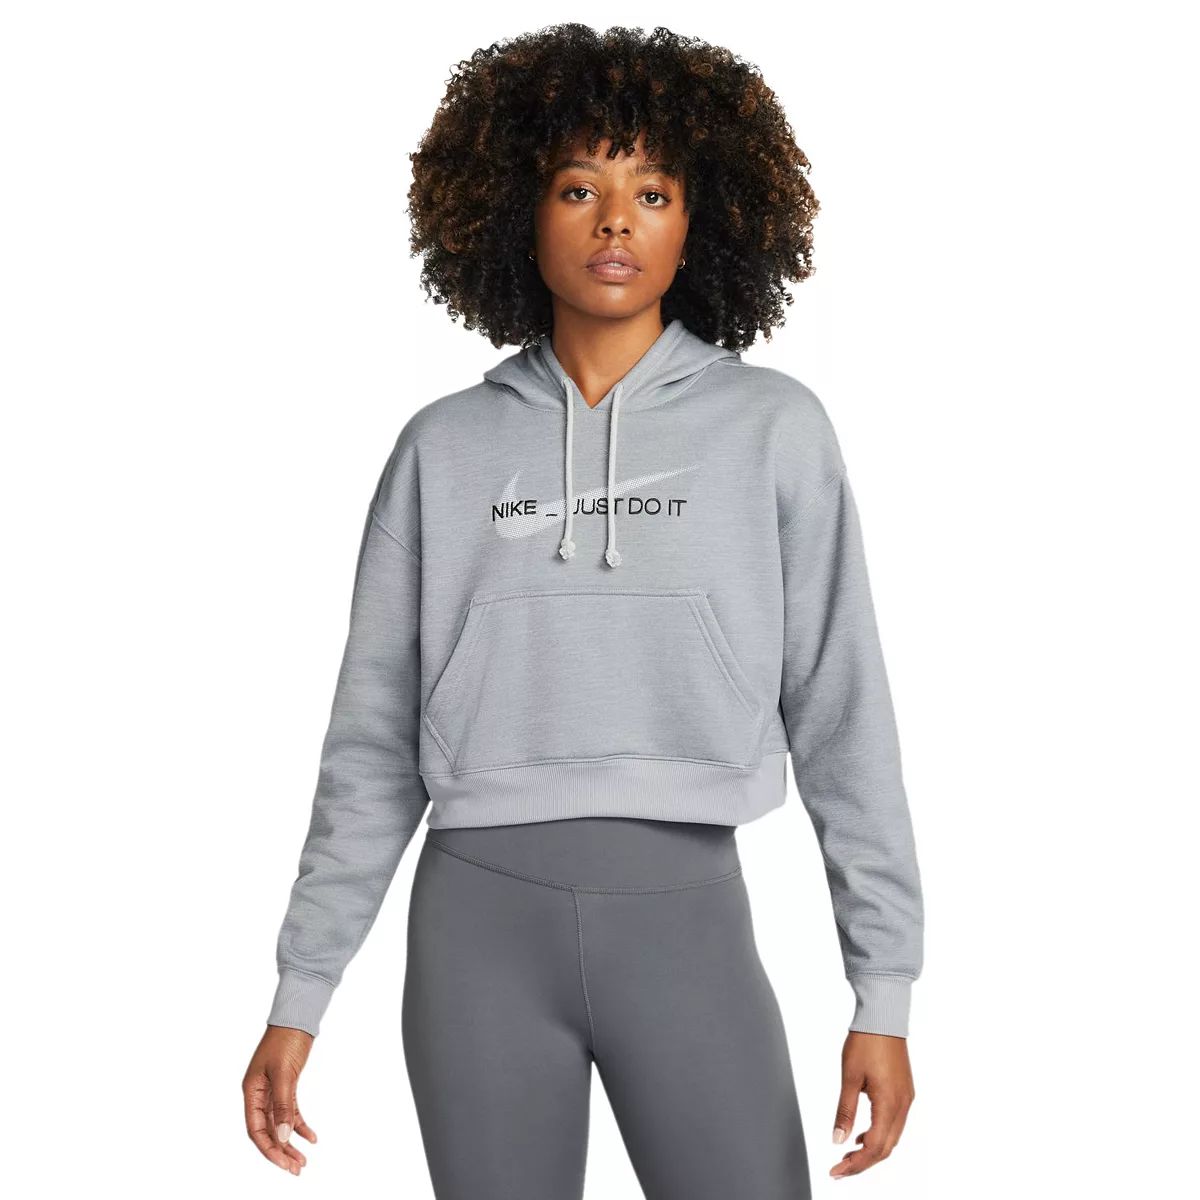 Women's Nike Therma-FIT Graphic Hoodie | Kohl's